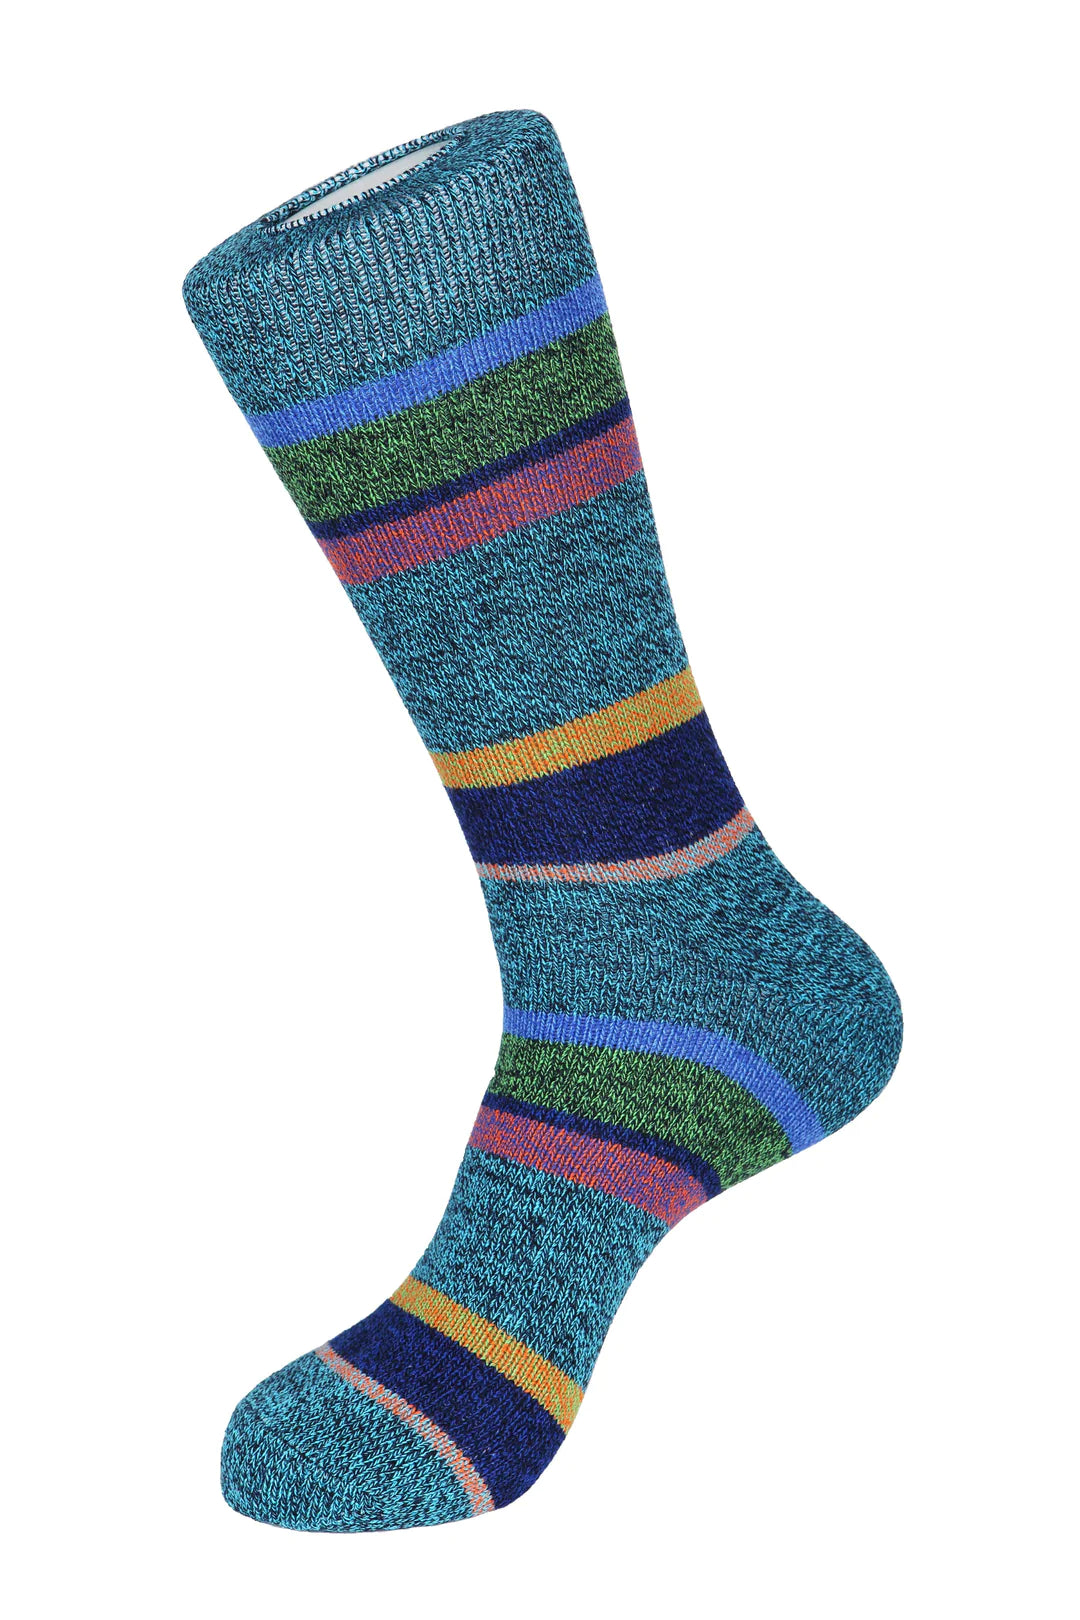 Unsimply Stitched boot socks with green, blue, and orange stripes, making it a great pairing with DFR89 blue denim jeans and a fun Sugar sport shirt.